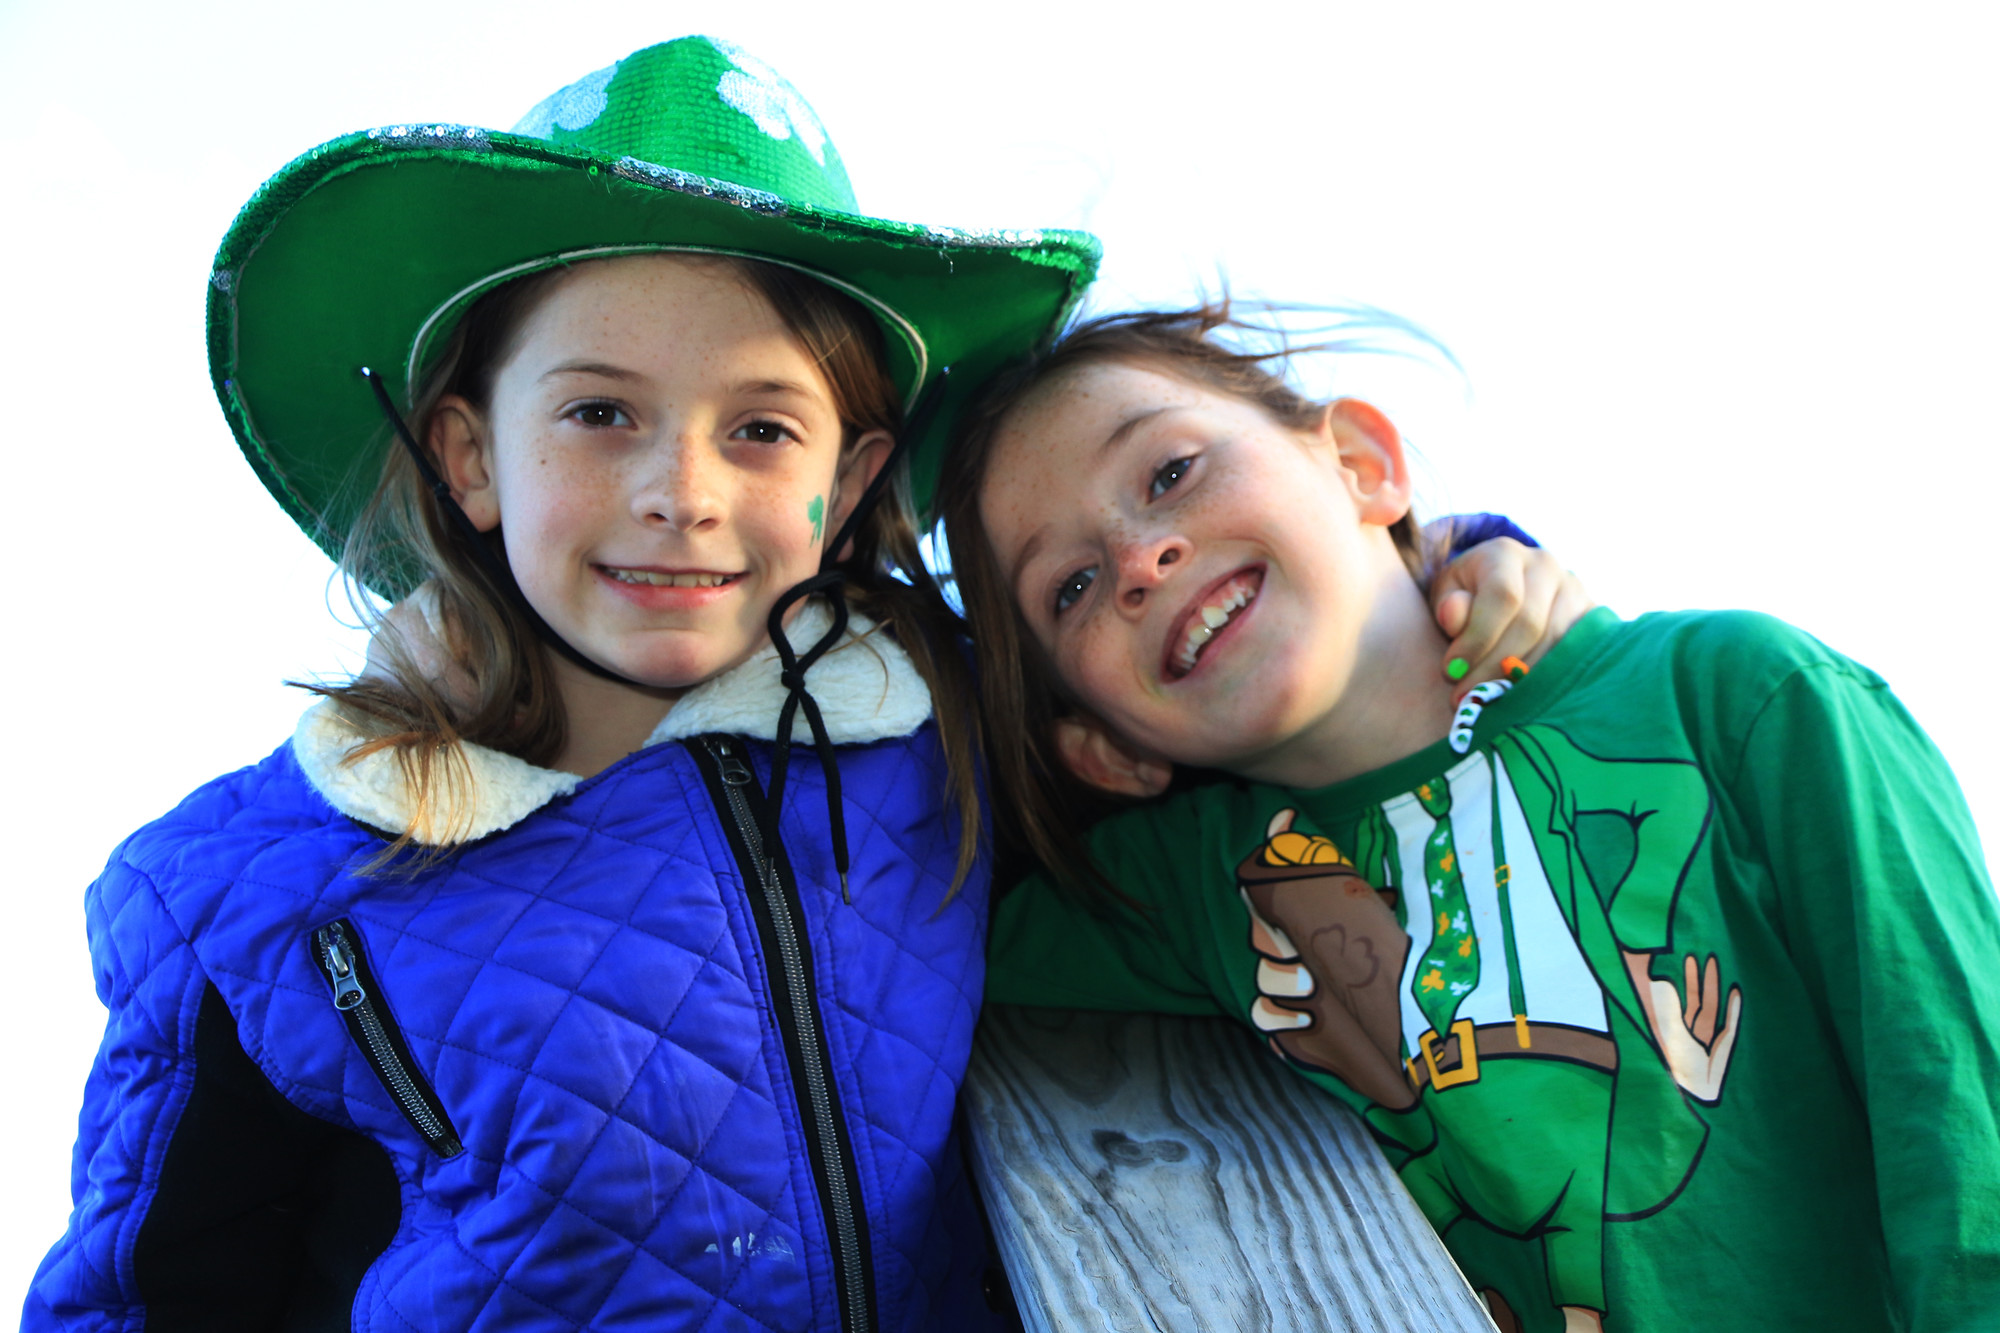 Molly, 9, and Kerr Magner, 7, had big smiles and festive outfits.